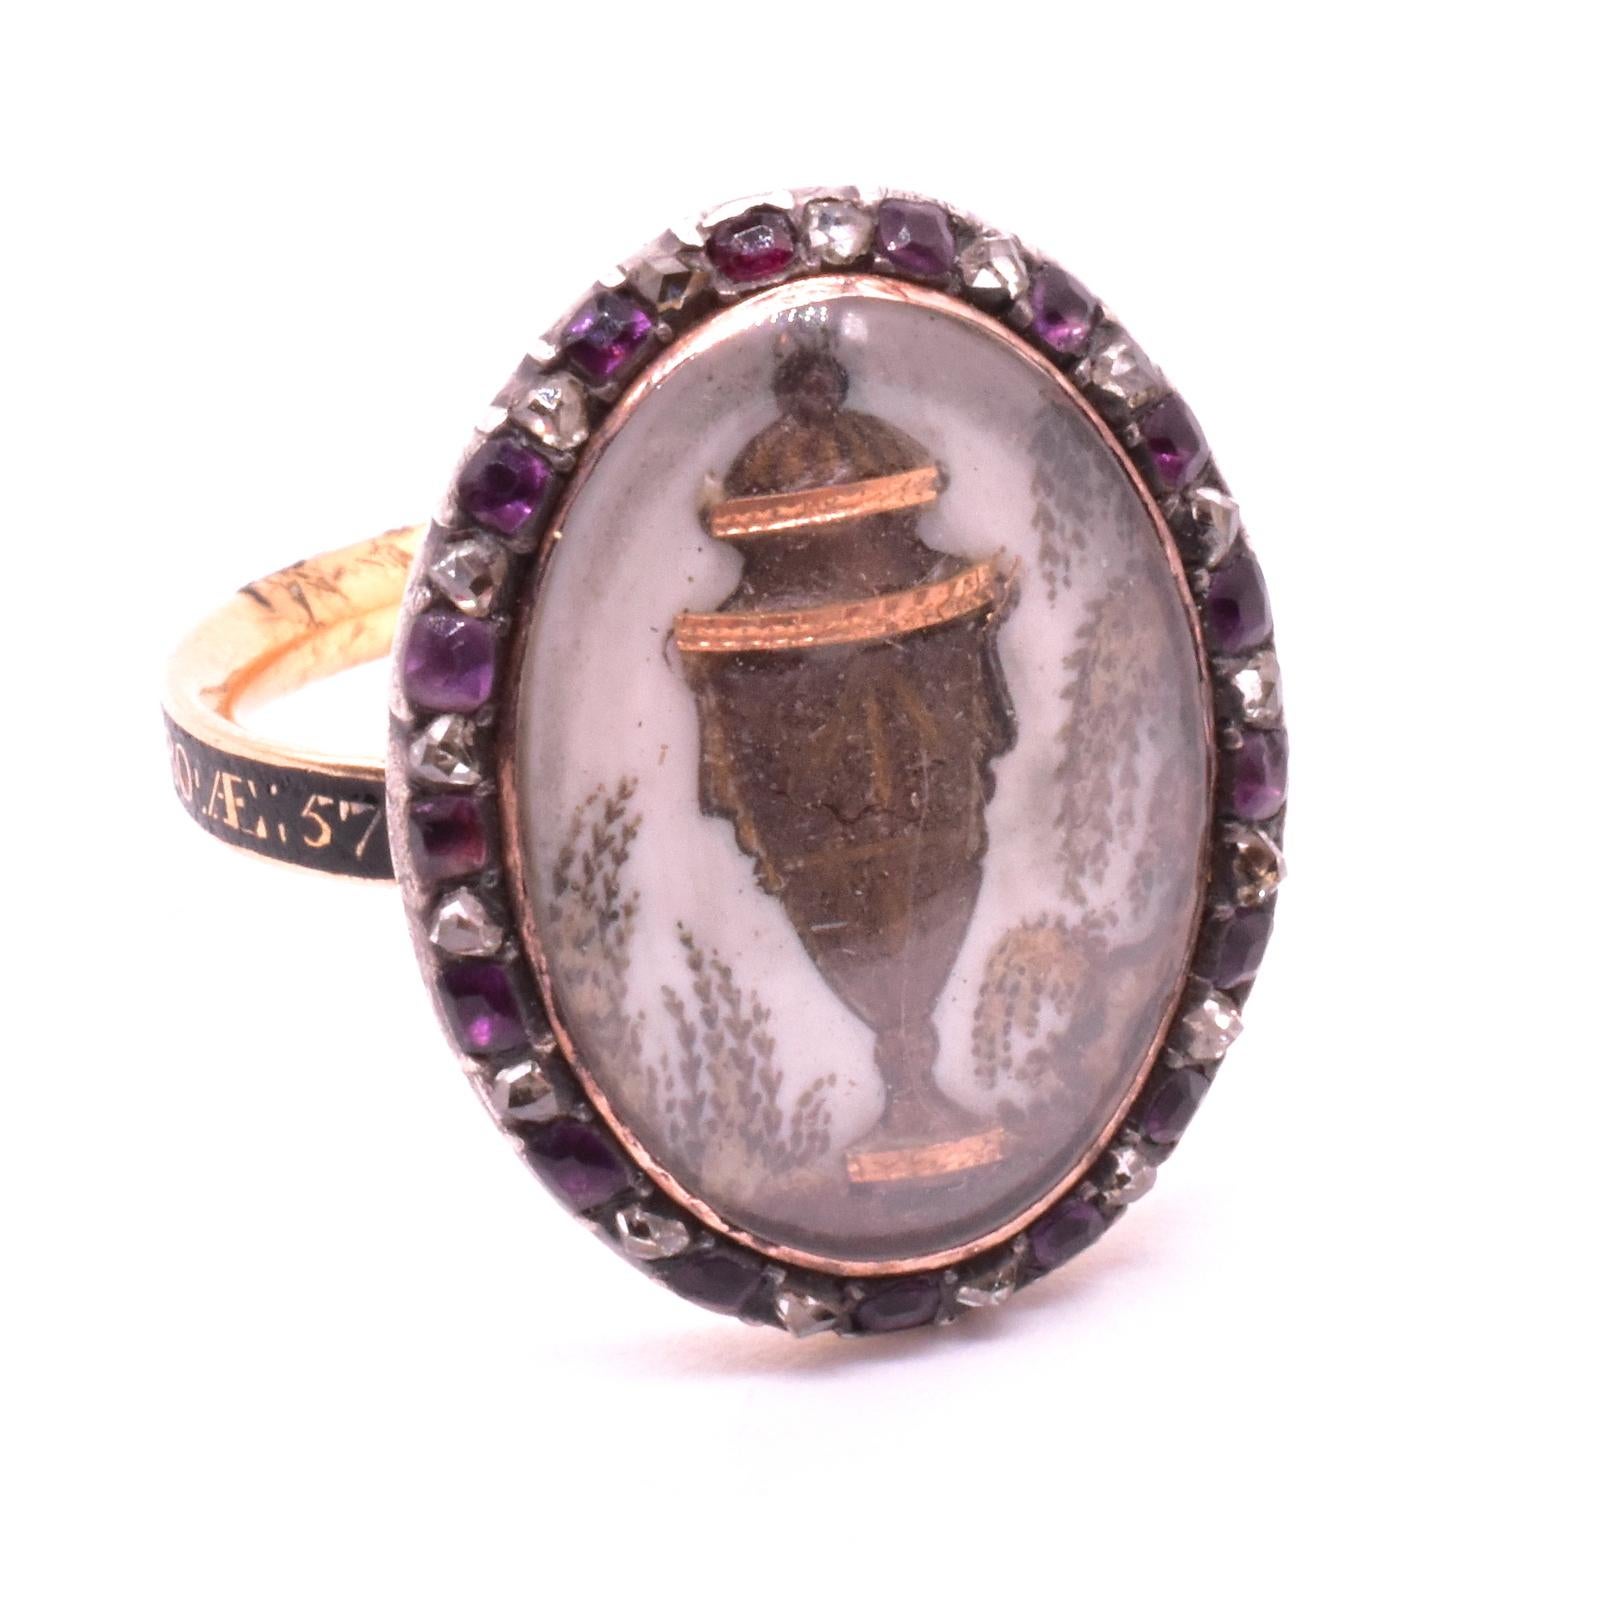 Exquisitely crafted hair paint memorial ring of an urn embellished with gold and surrounded by weeping willow branches. The enamel band says 